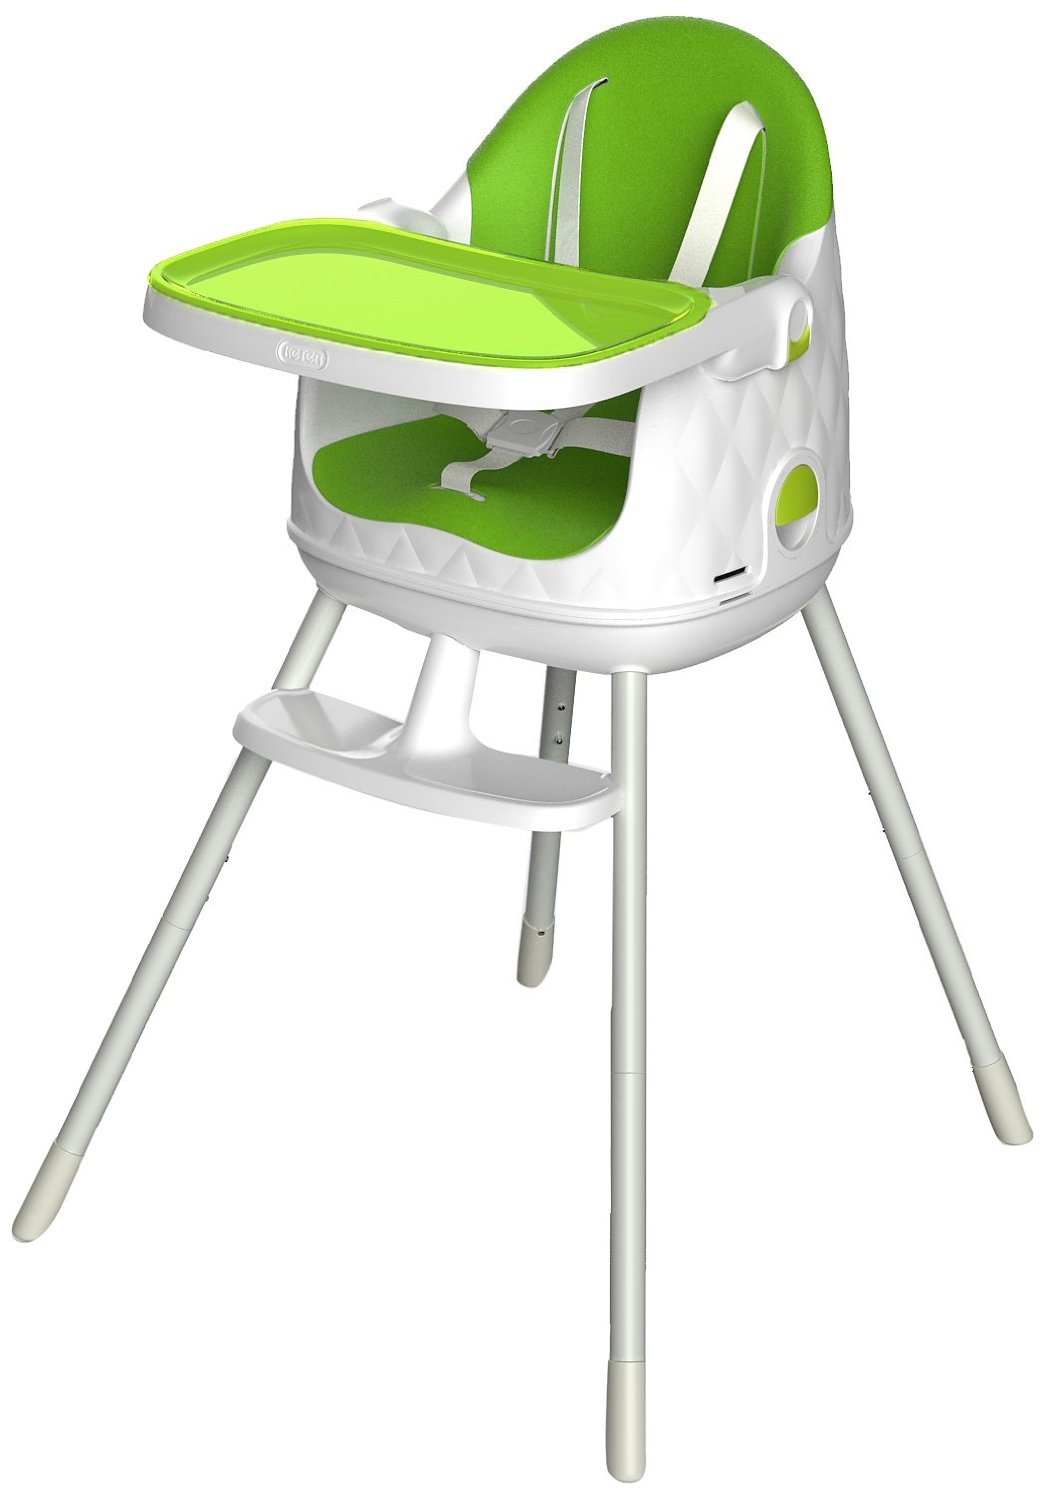 Keter Multi Dine Baby Child Infant Portable High Feeding Chair Booster Seat, ...